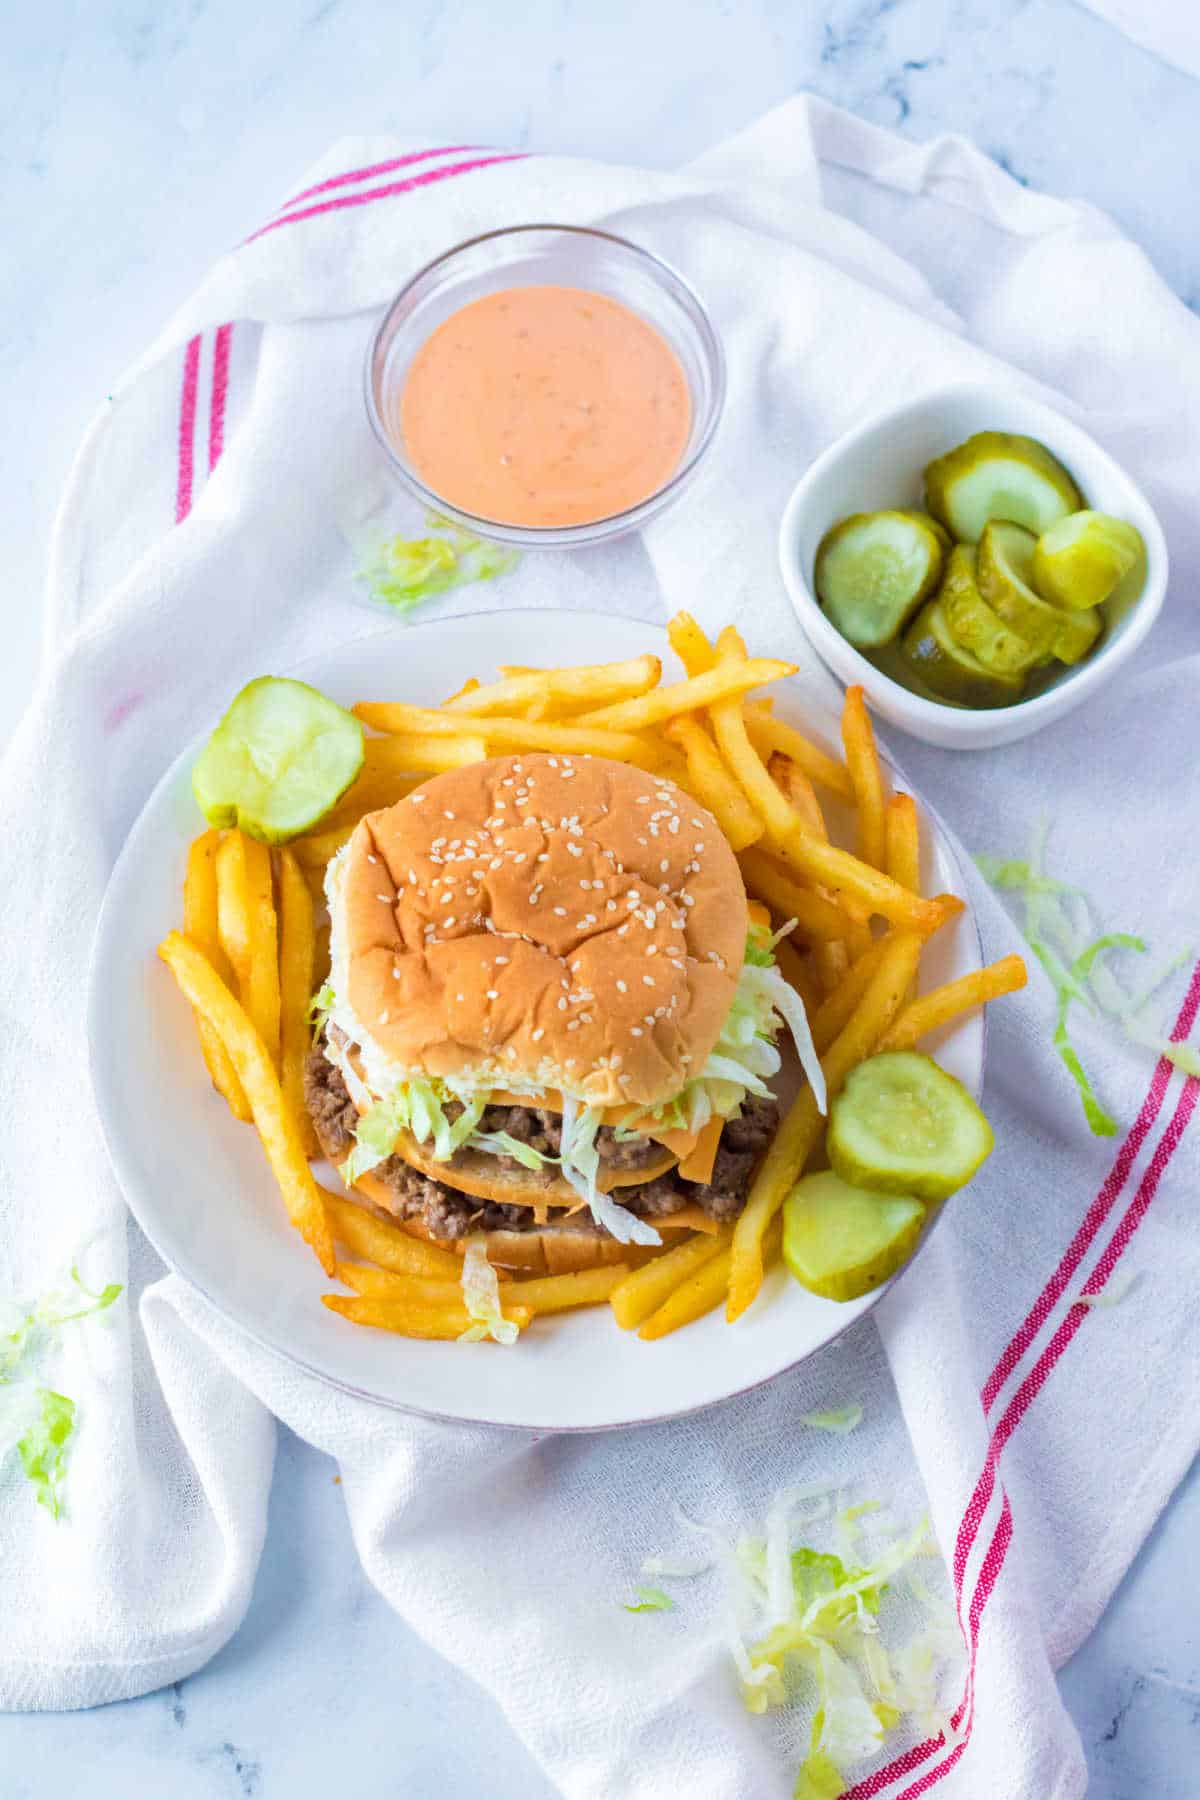 A big mac sloppy joe on a plate with fries and pickle slices.